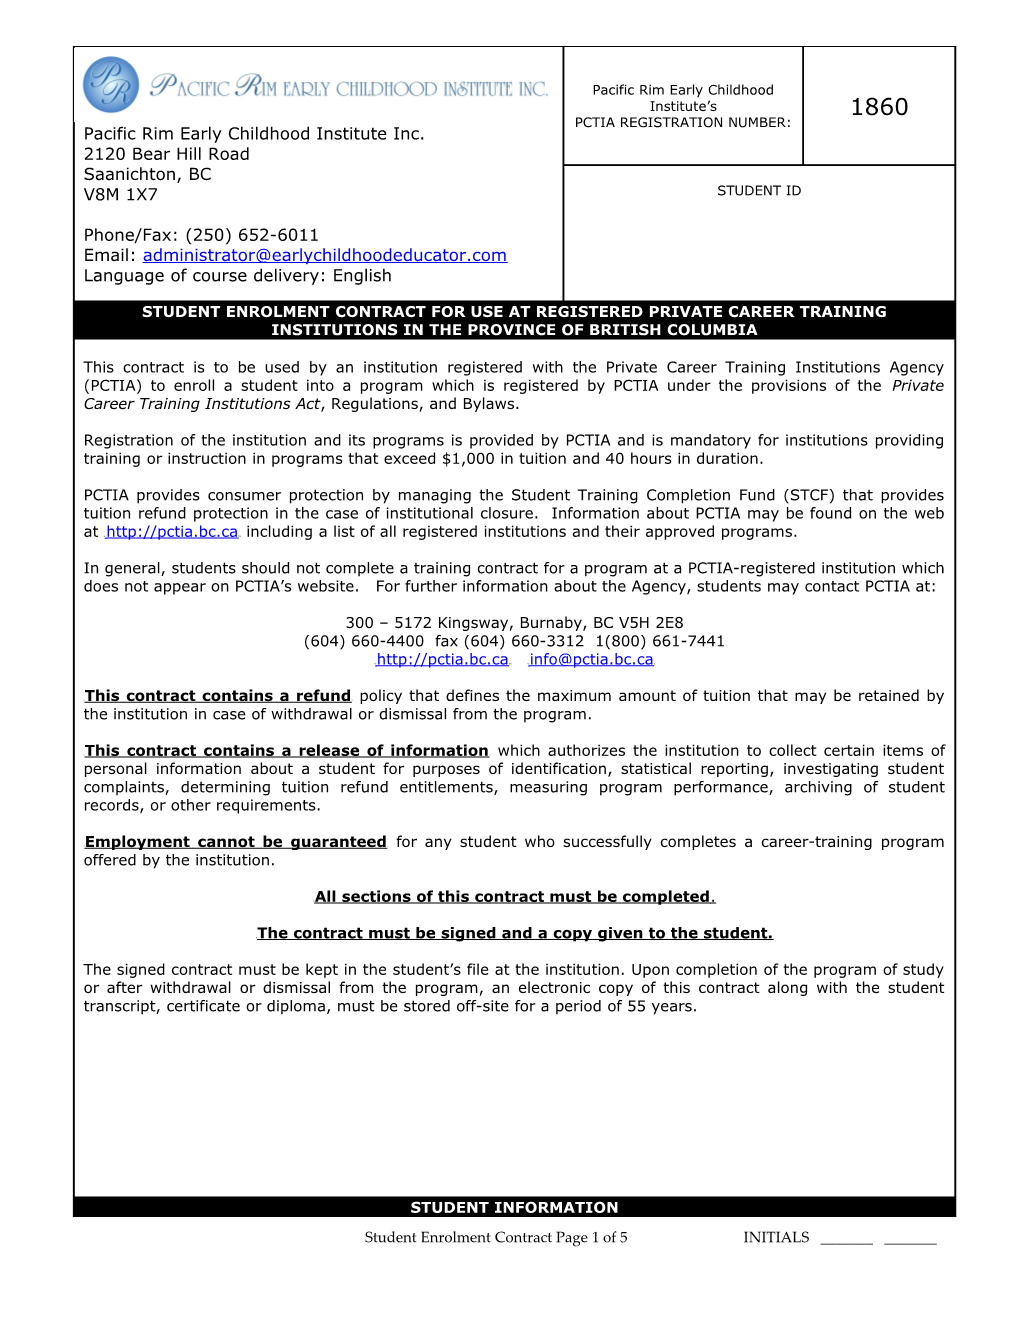 Student Enrolment Contract for Use at Registered Private Career Training Institutions In